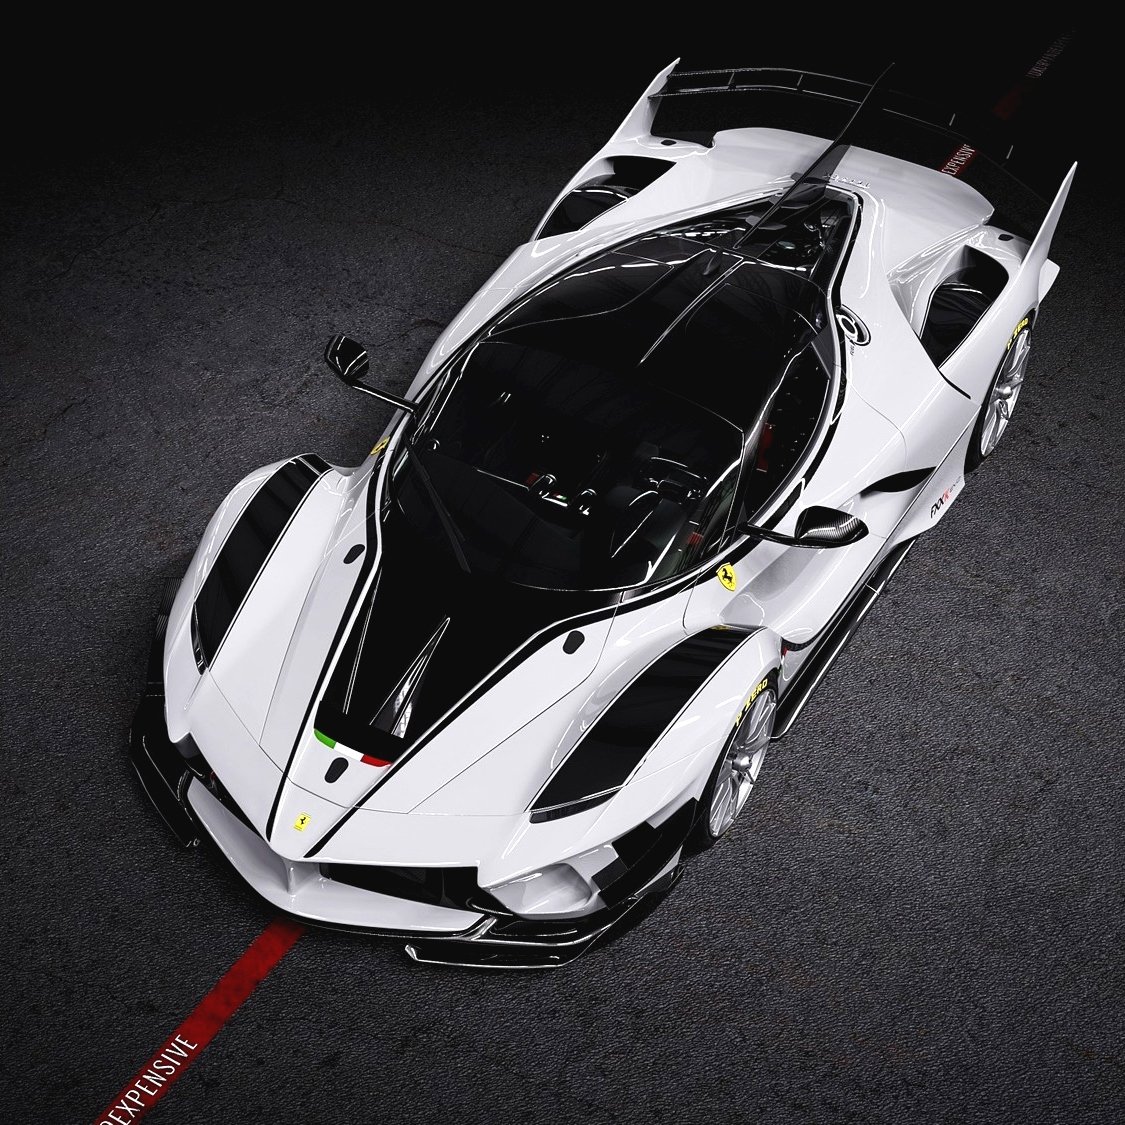 Top 10 Most Expensive Ferrari Cars in the World in 2022